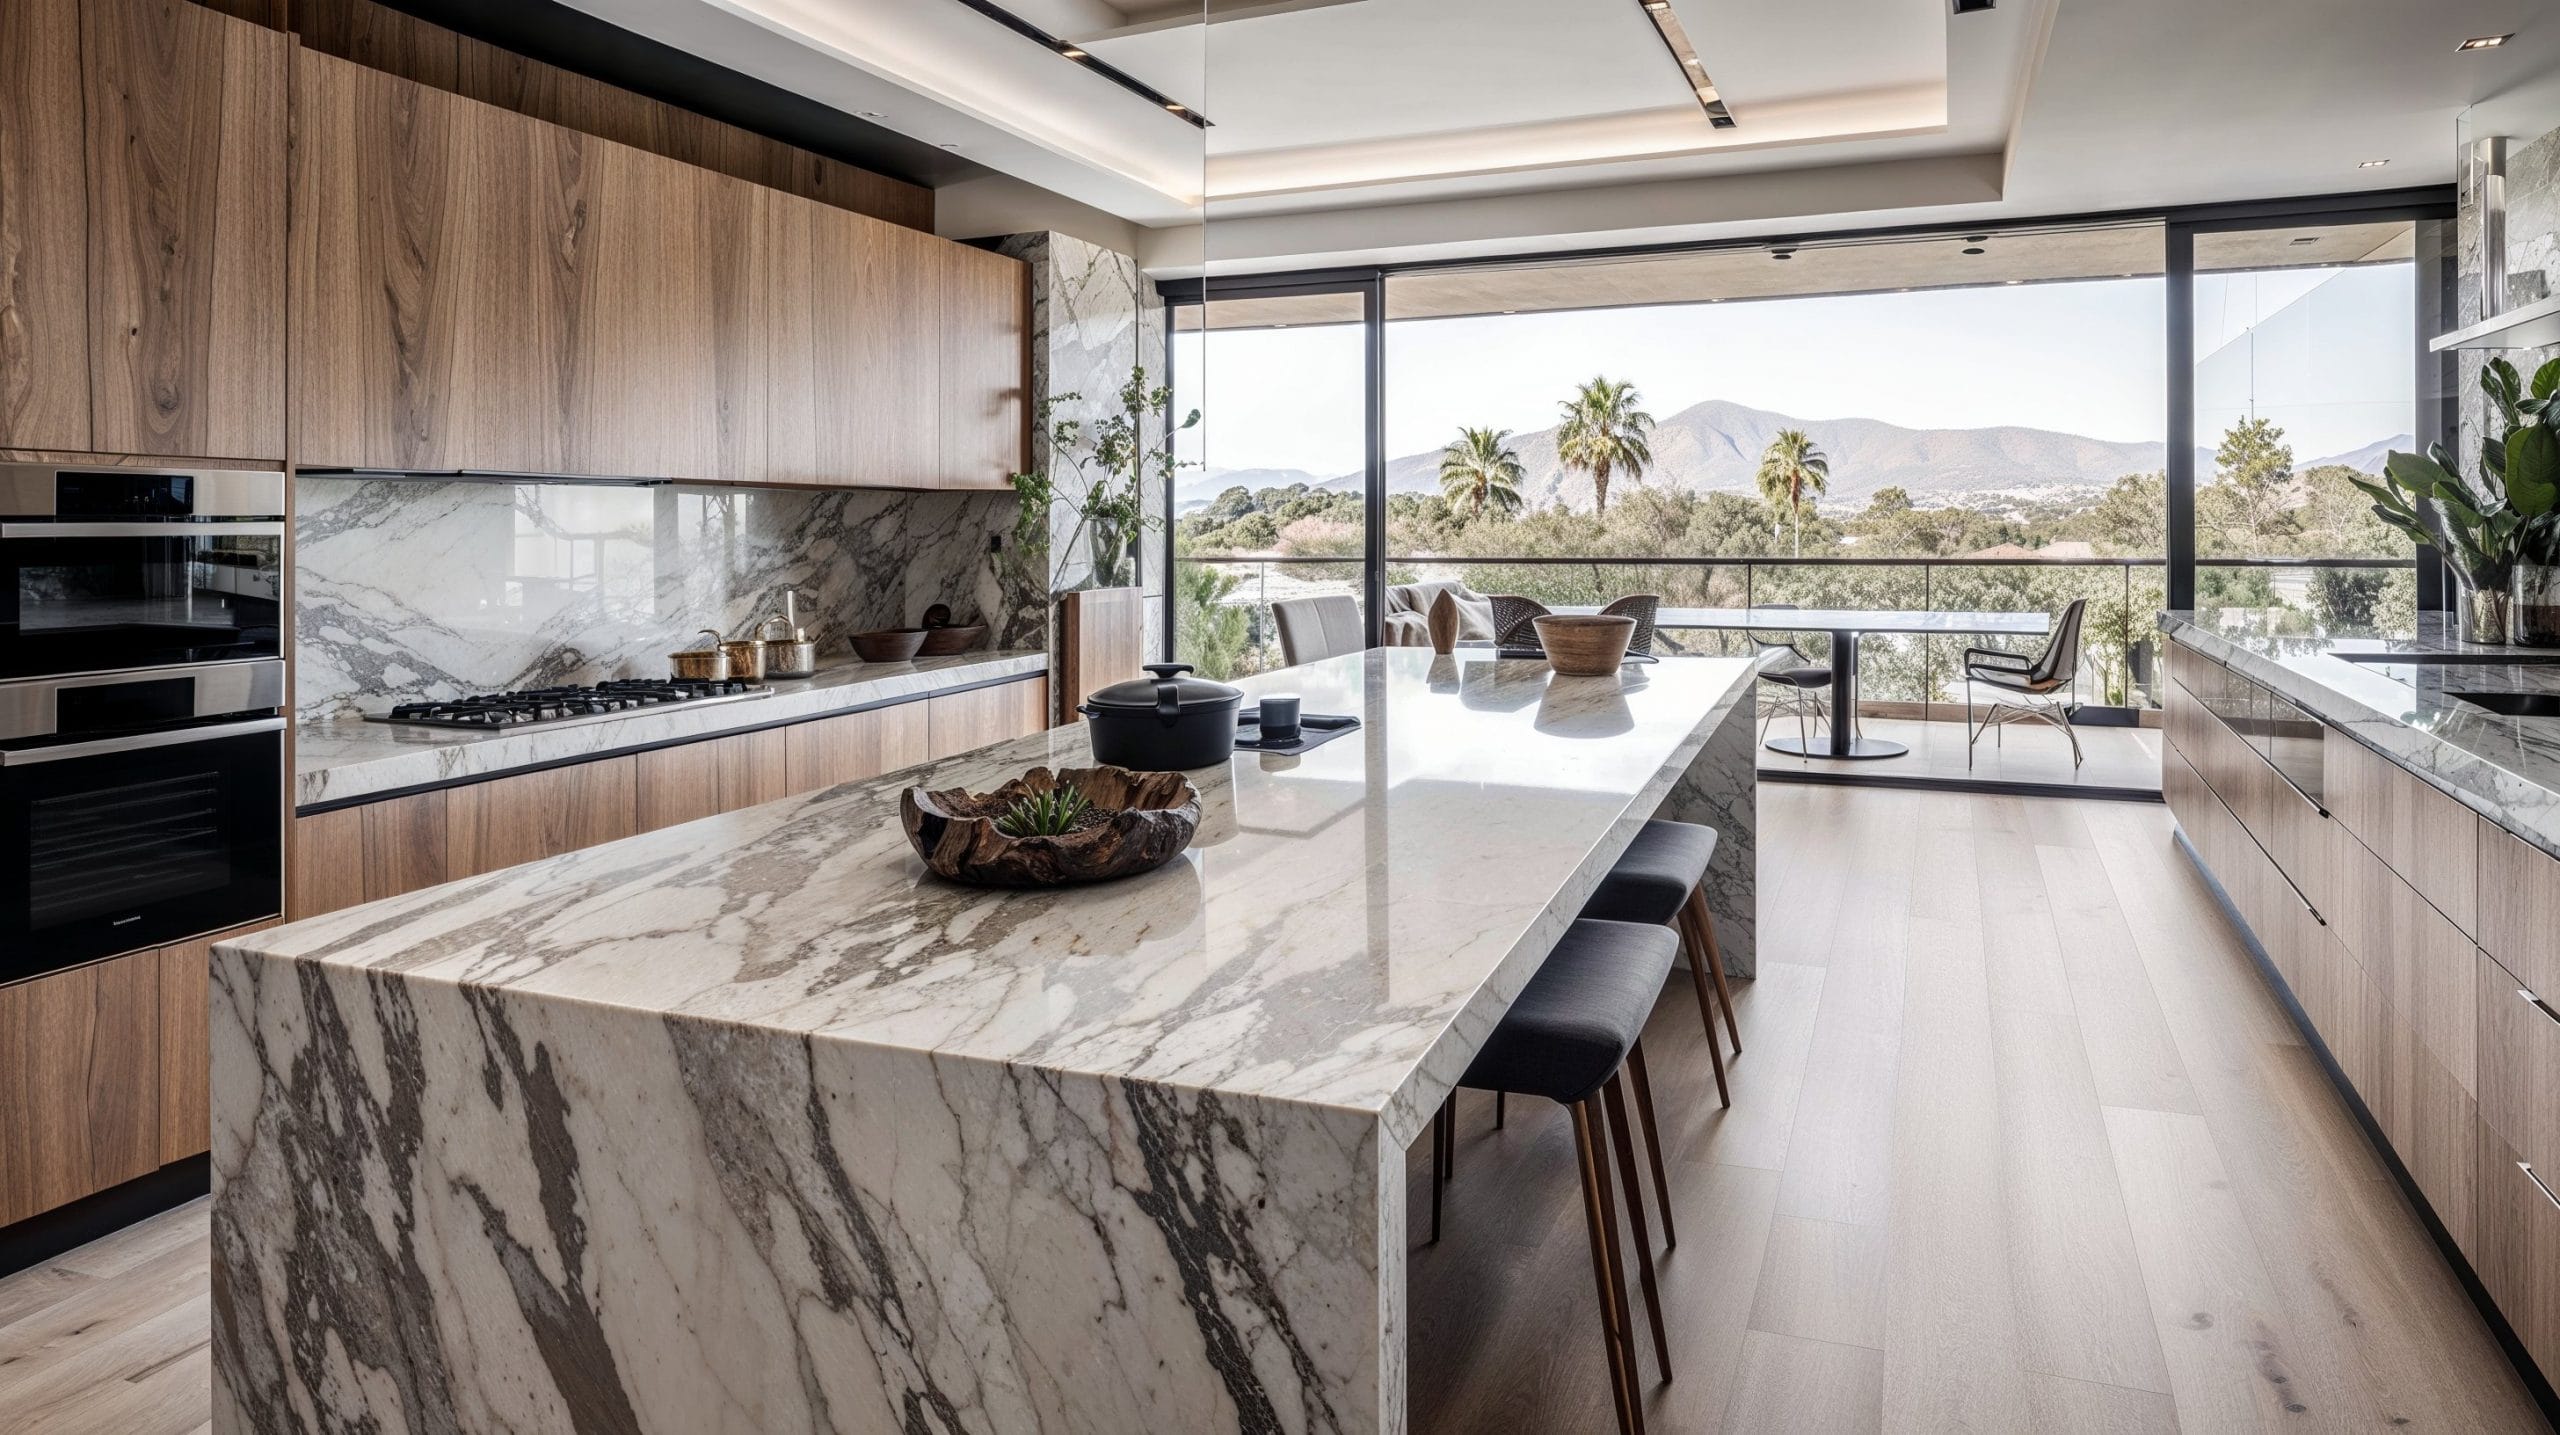 Four Countertop Trends in 2022  Materials, Finishes, Designs, & More